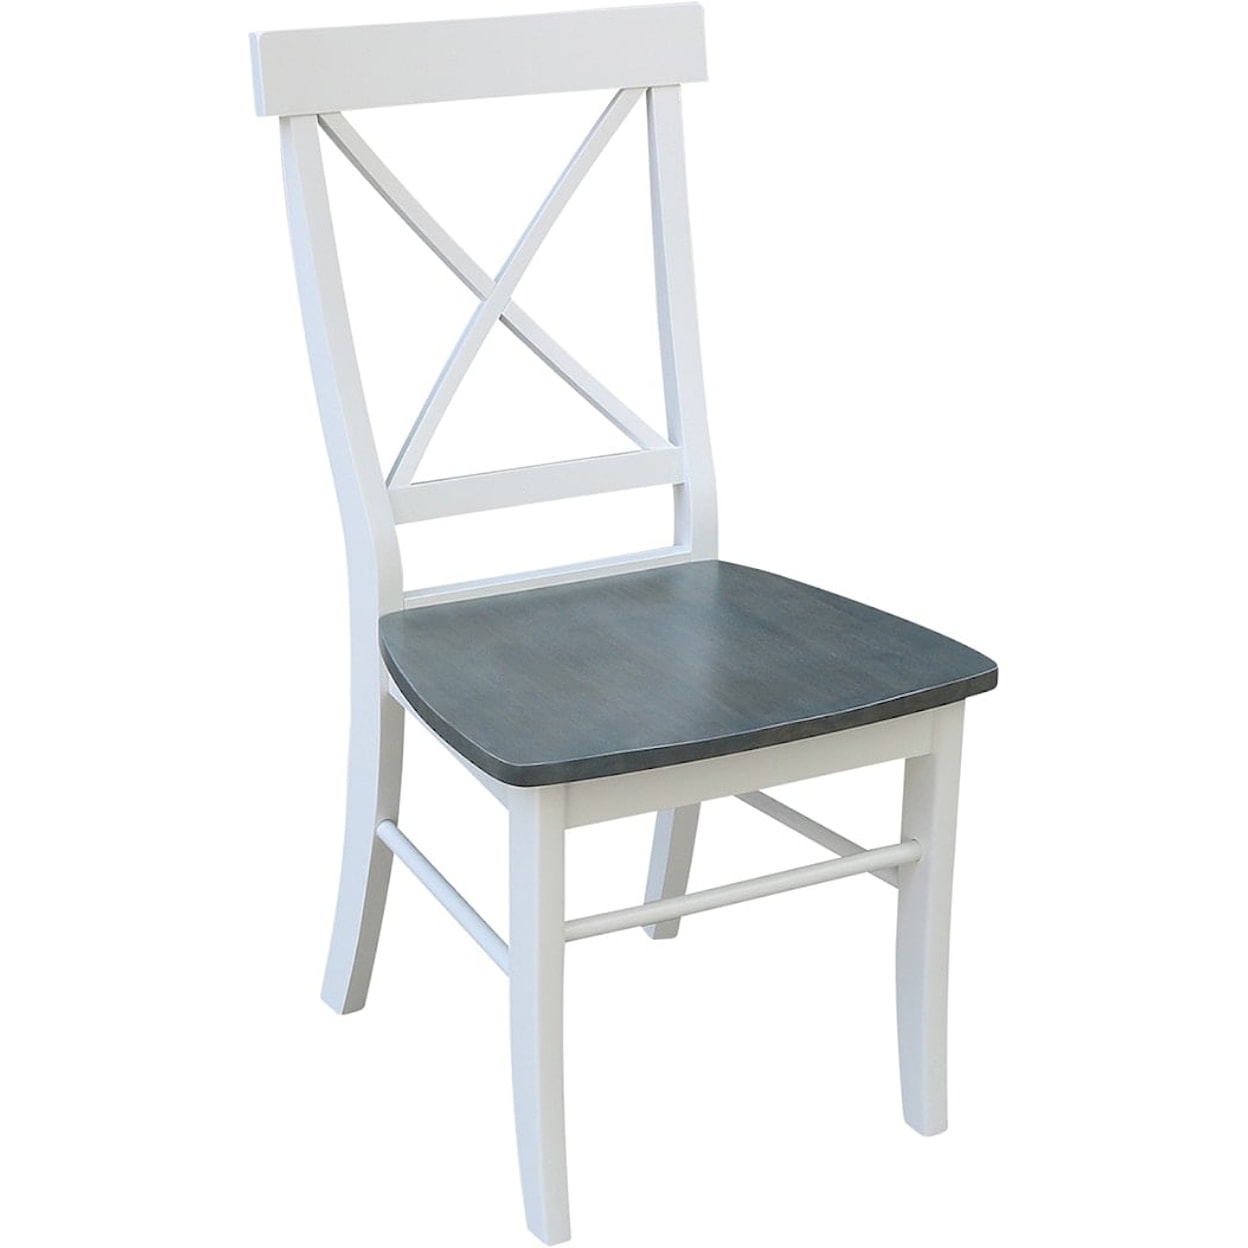 John Thomas Dining Essentials X-Back Chair in Heather Gray/White